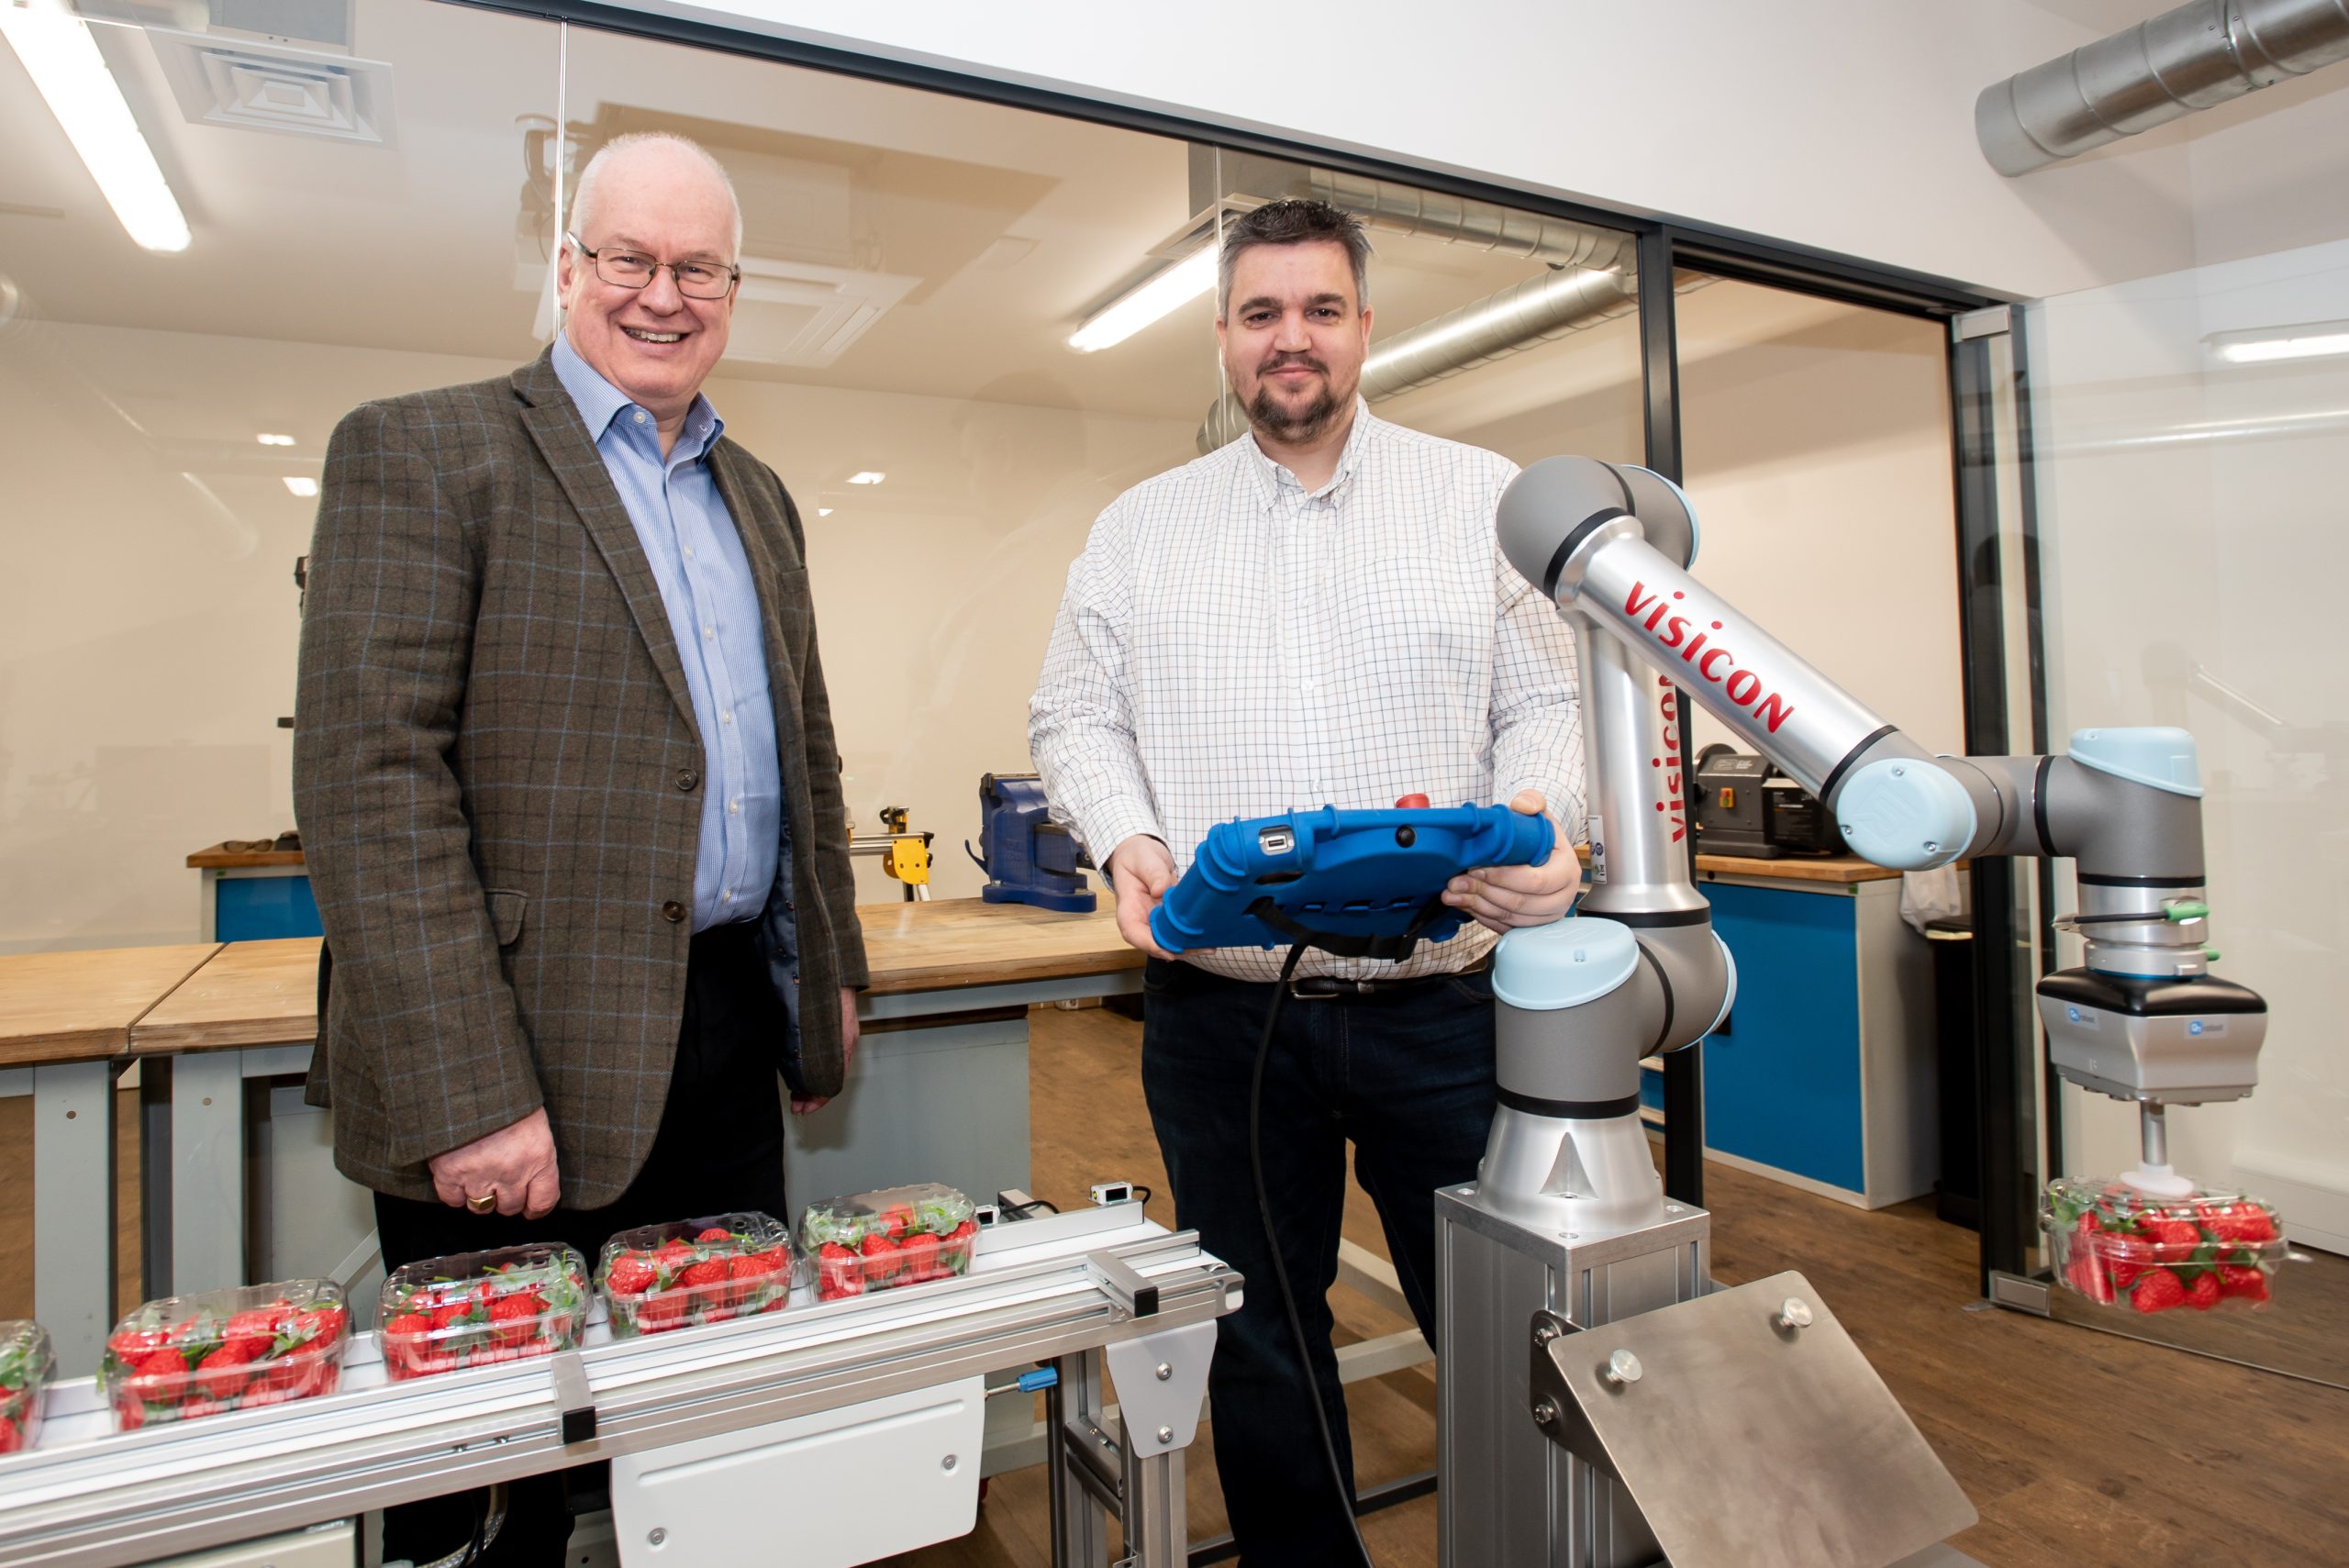 BUSINESS | A leading robotics and automation business has relocated to Hereford’s Shell Store